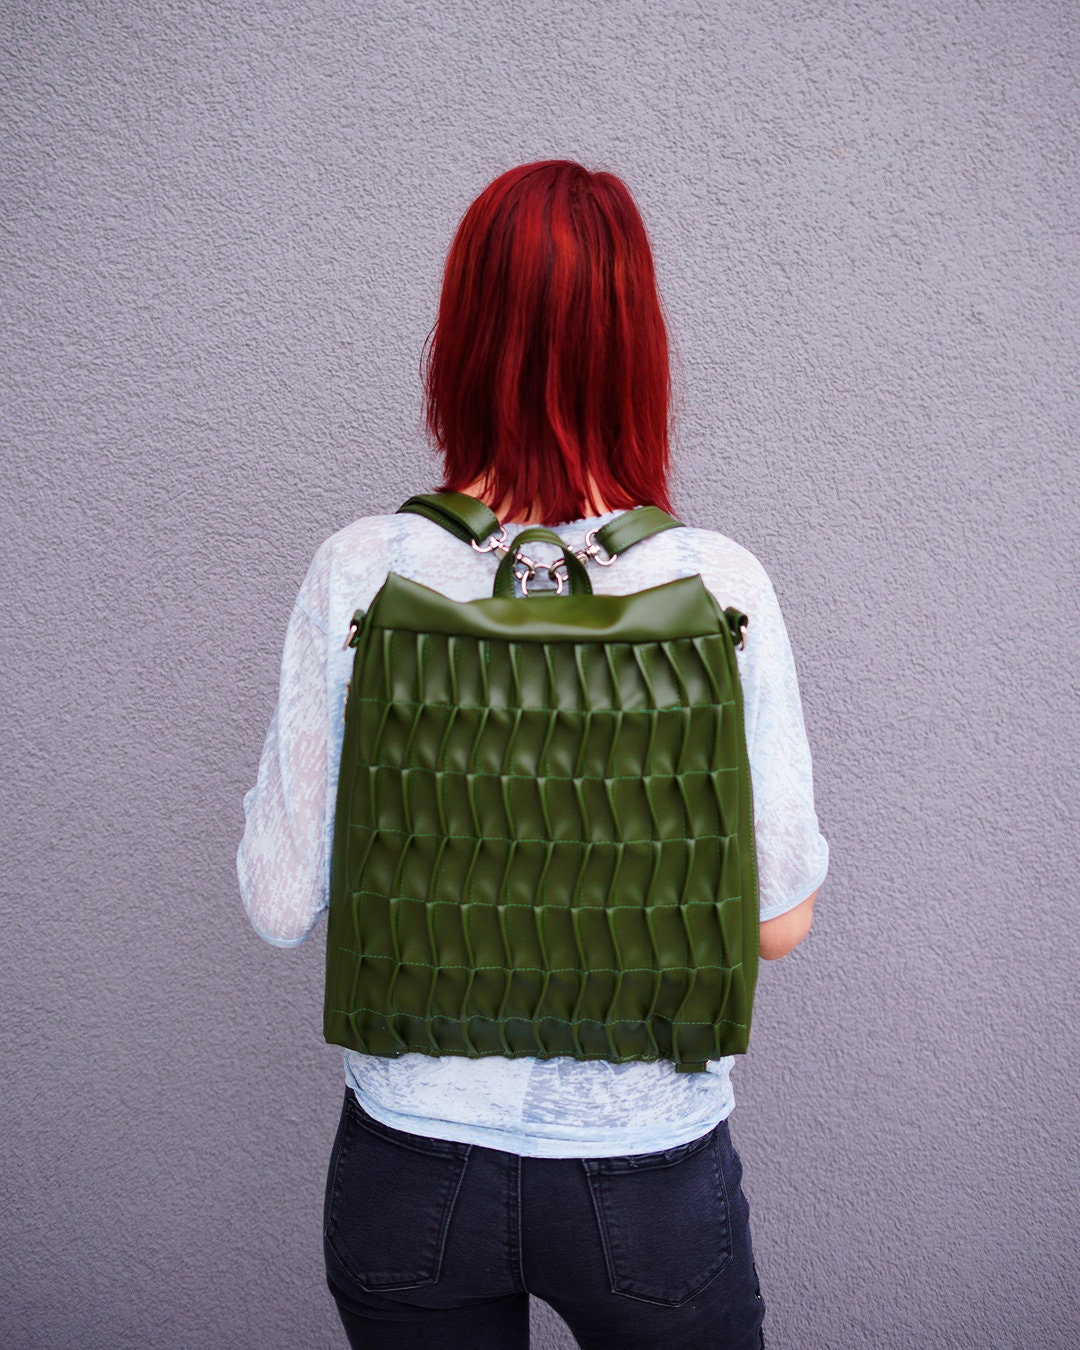 Cactus Leather Backpack Vegan Leather Bag Convertible 